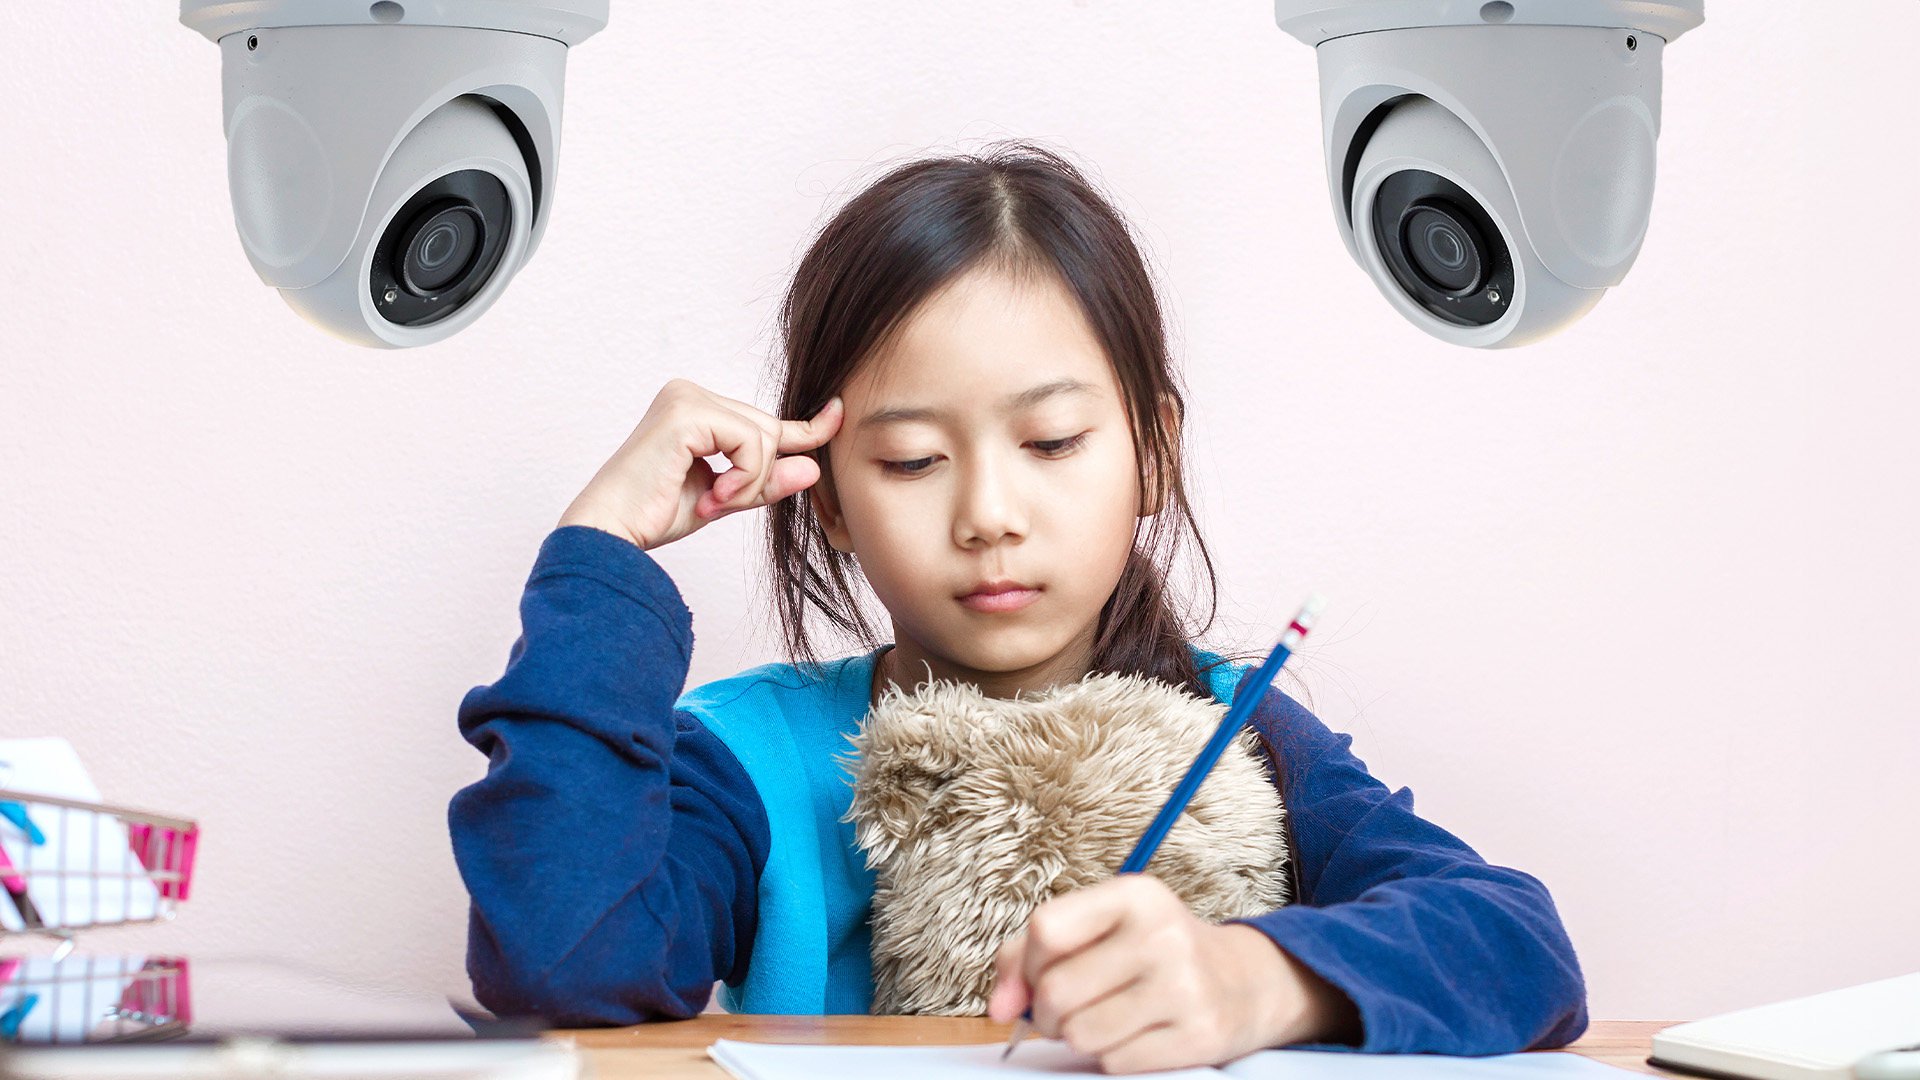 The plight of a young girl in China, who railed against her mother’s decision to install a spy camera in her room to make sure she studied hard, has reignited the debate about academic pressure being placed on mainland youngsters. Photo: SCMP composite/Shutterstock